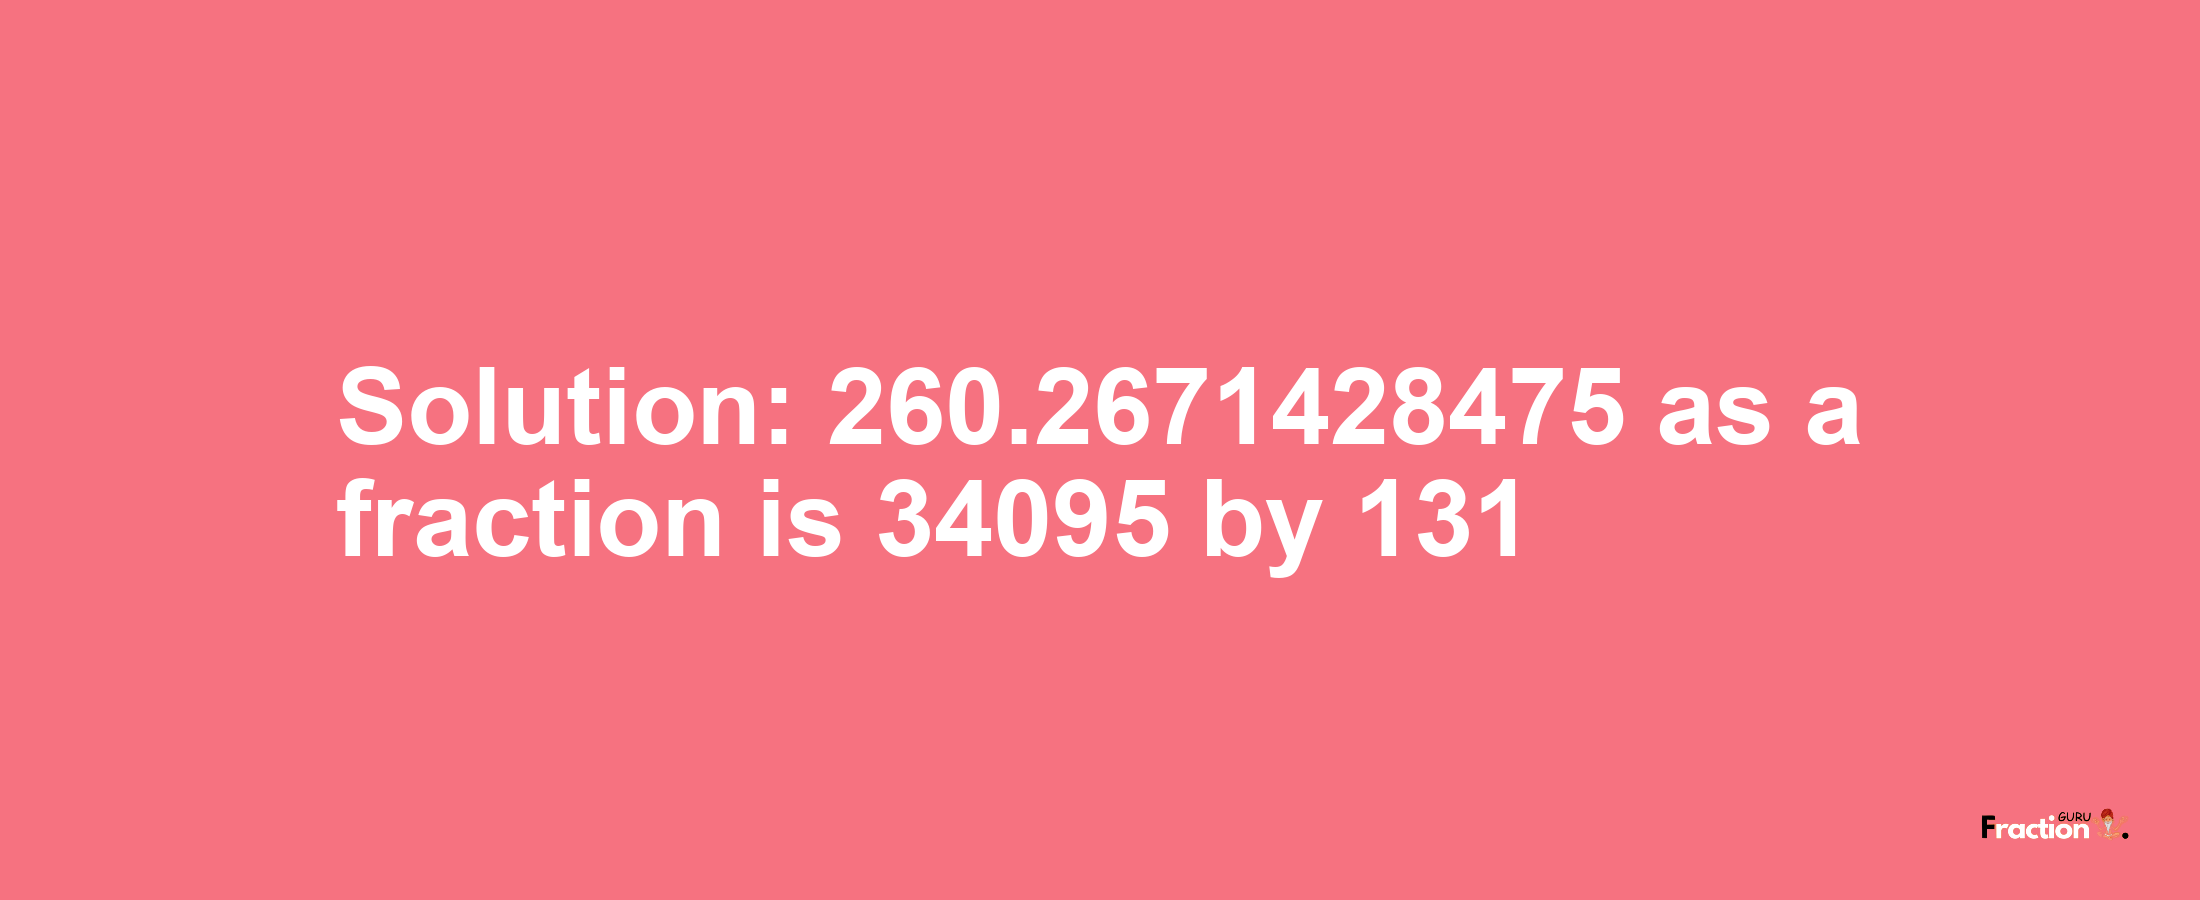 Solution:260.2671428475 as a fraction is 34095/131